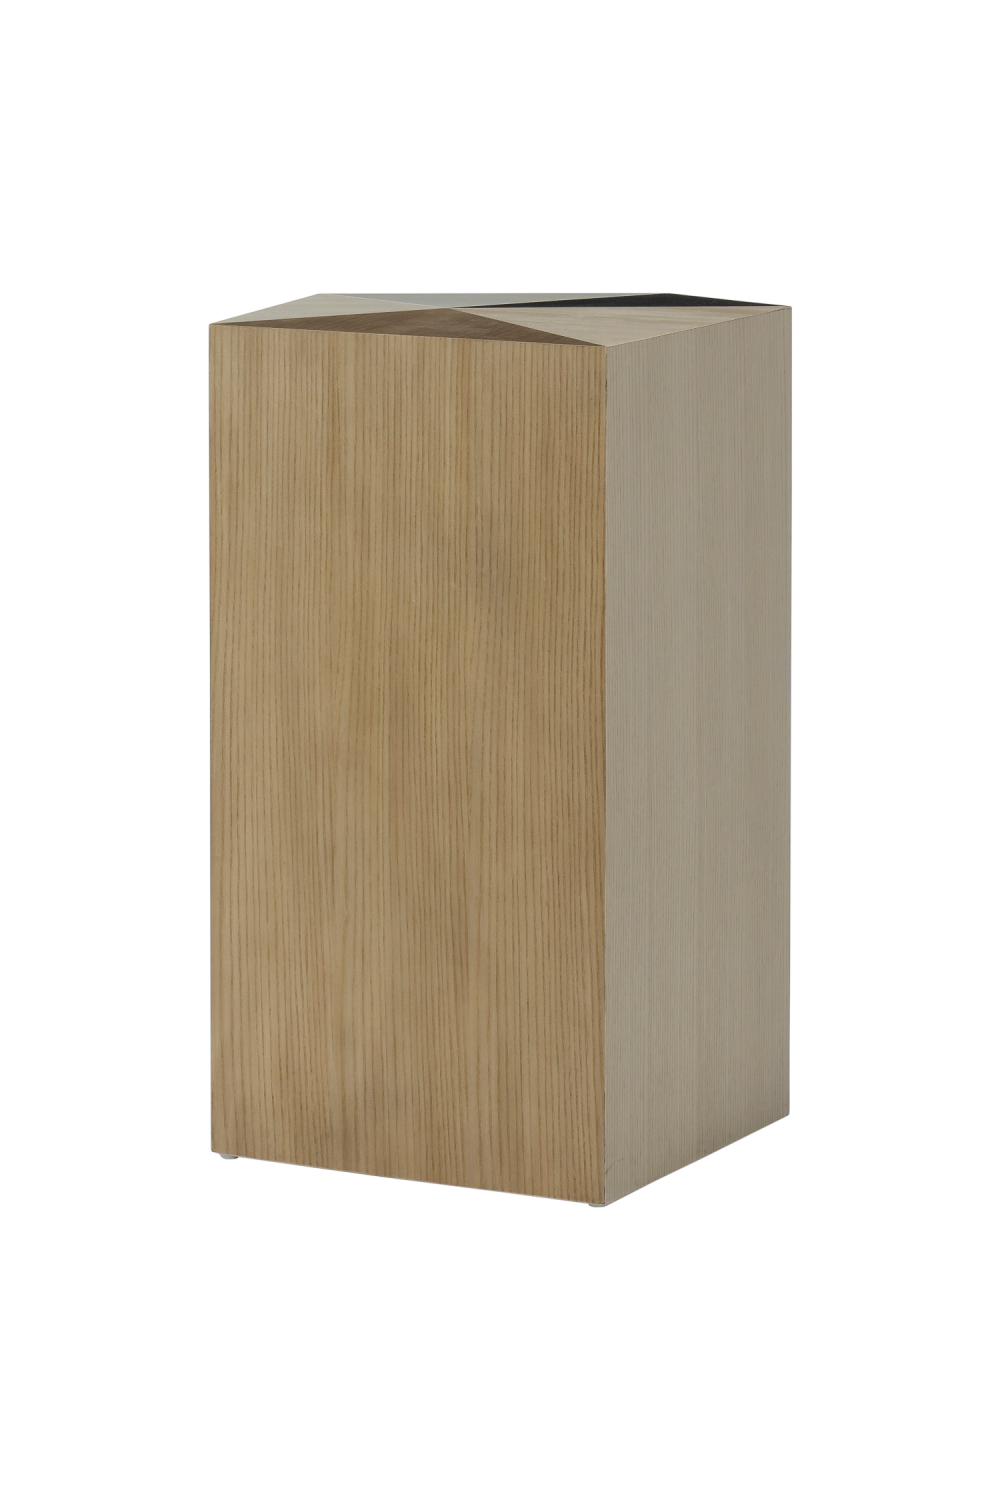 Multicolored Wooden Accent Table | Andrew Martin Vincent  | OROA